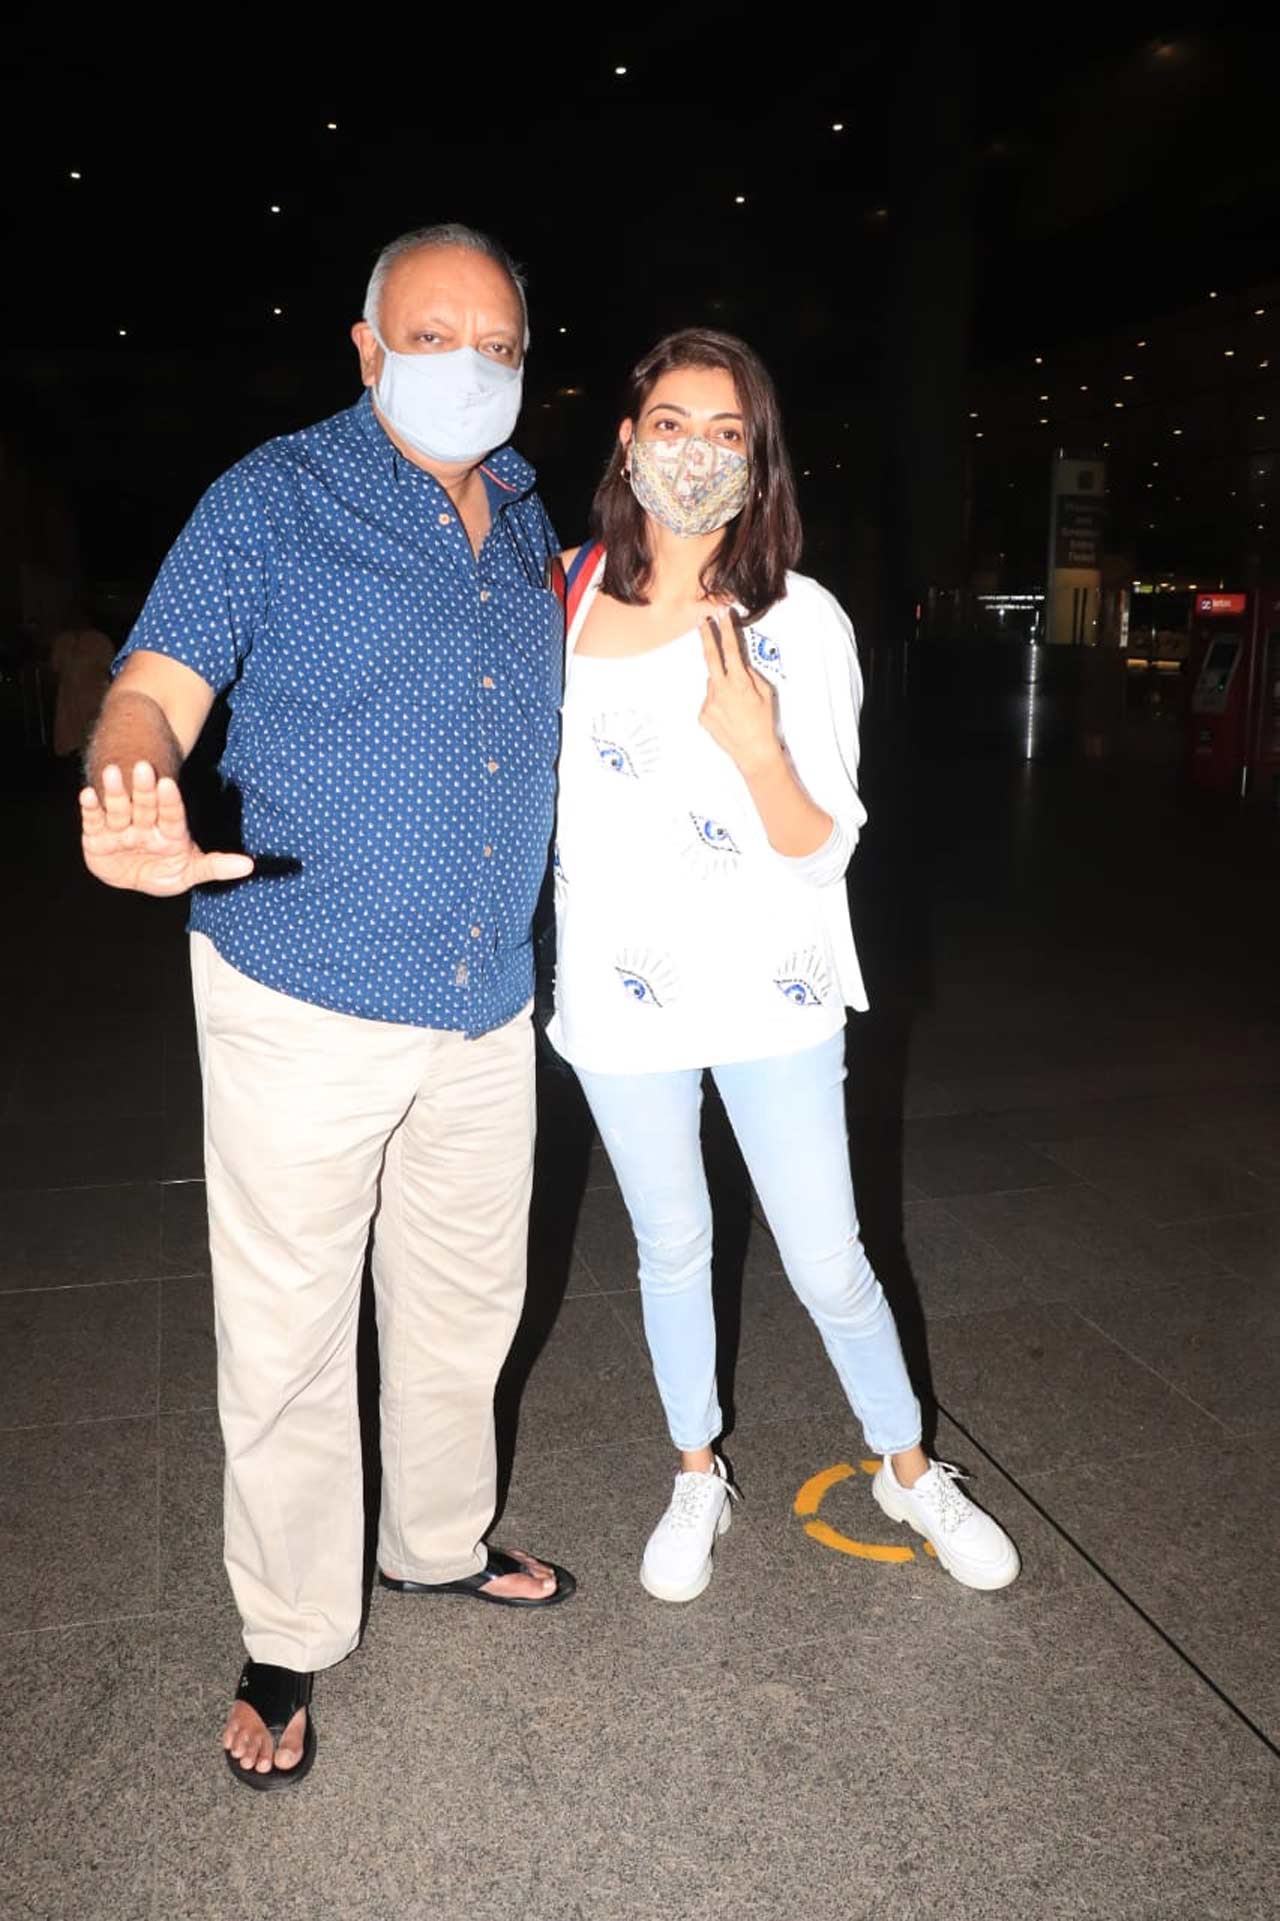 Kajal Aggarwal, who married Gautam Kichlu in 2020, sported wide-legged pants and a basic white tee as her airport look. She completed her casual outfit with a denim jacket as she stepped out for travel.